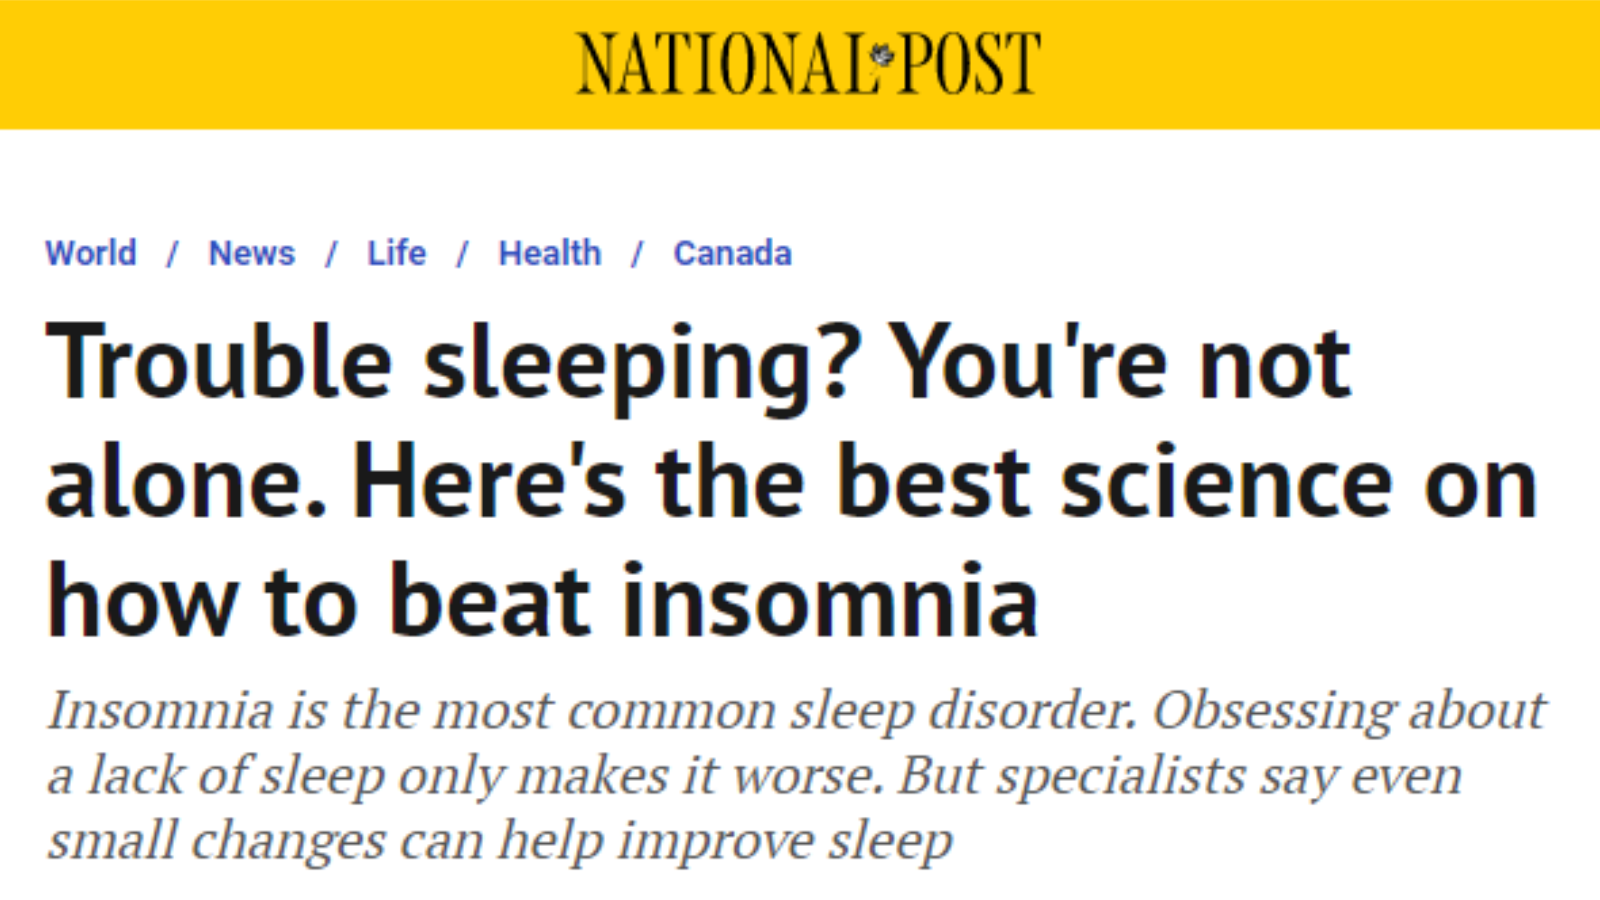 National Post: Trouble sleeping? You're not alone. Here's the best science on how to beat insomnia Insomnia is the most common sleep disorder. Obsessing about a lack of sleep only makes it worse. But specialists say even small changes can help improve sleep